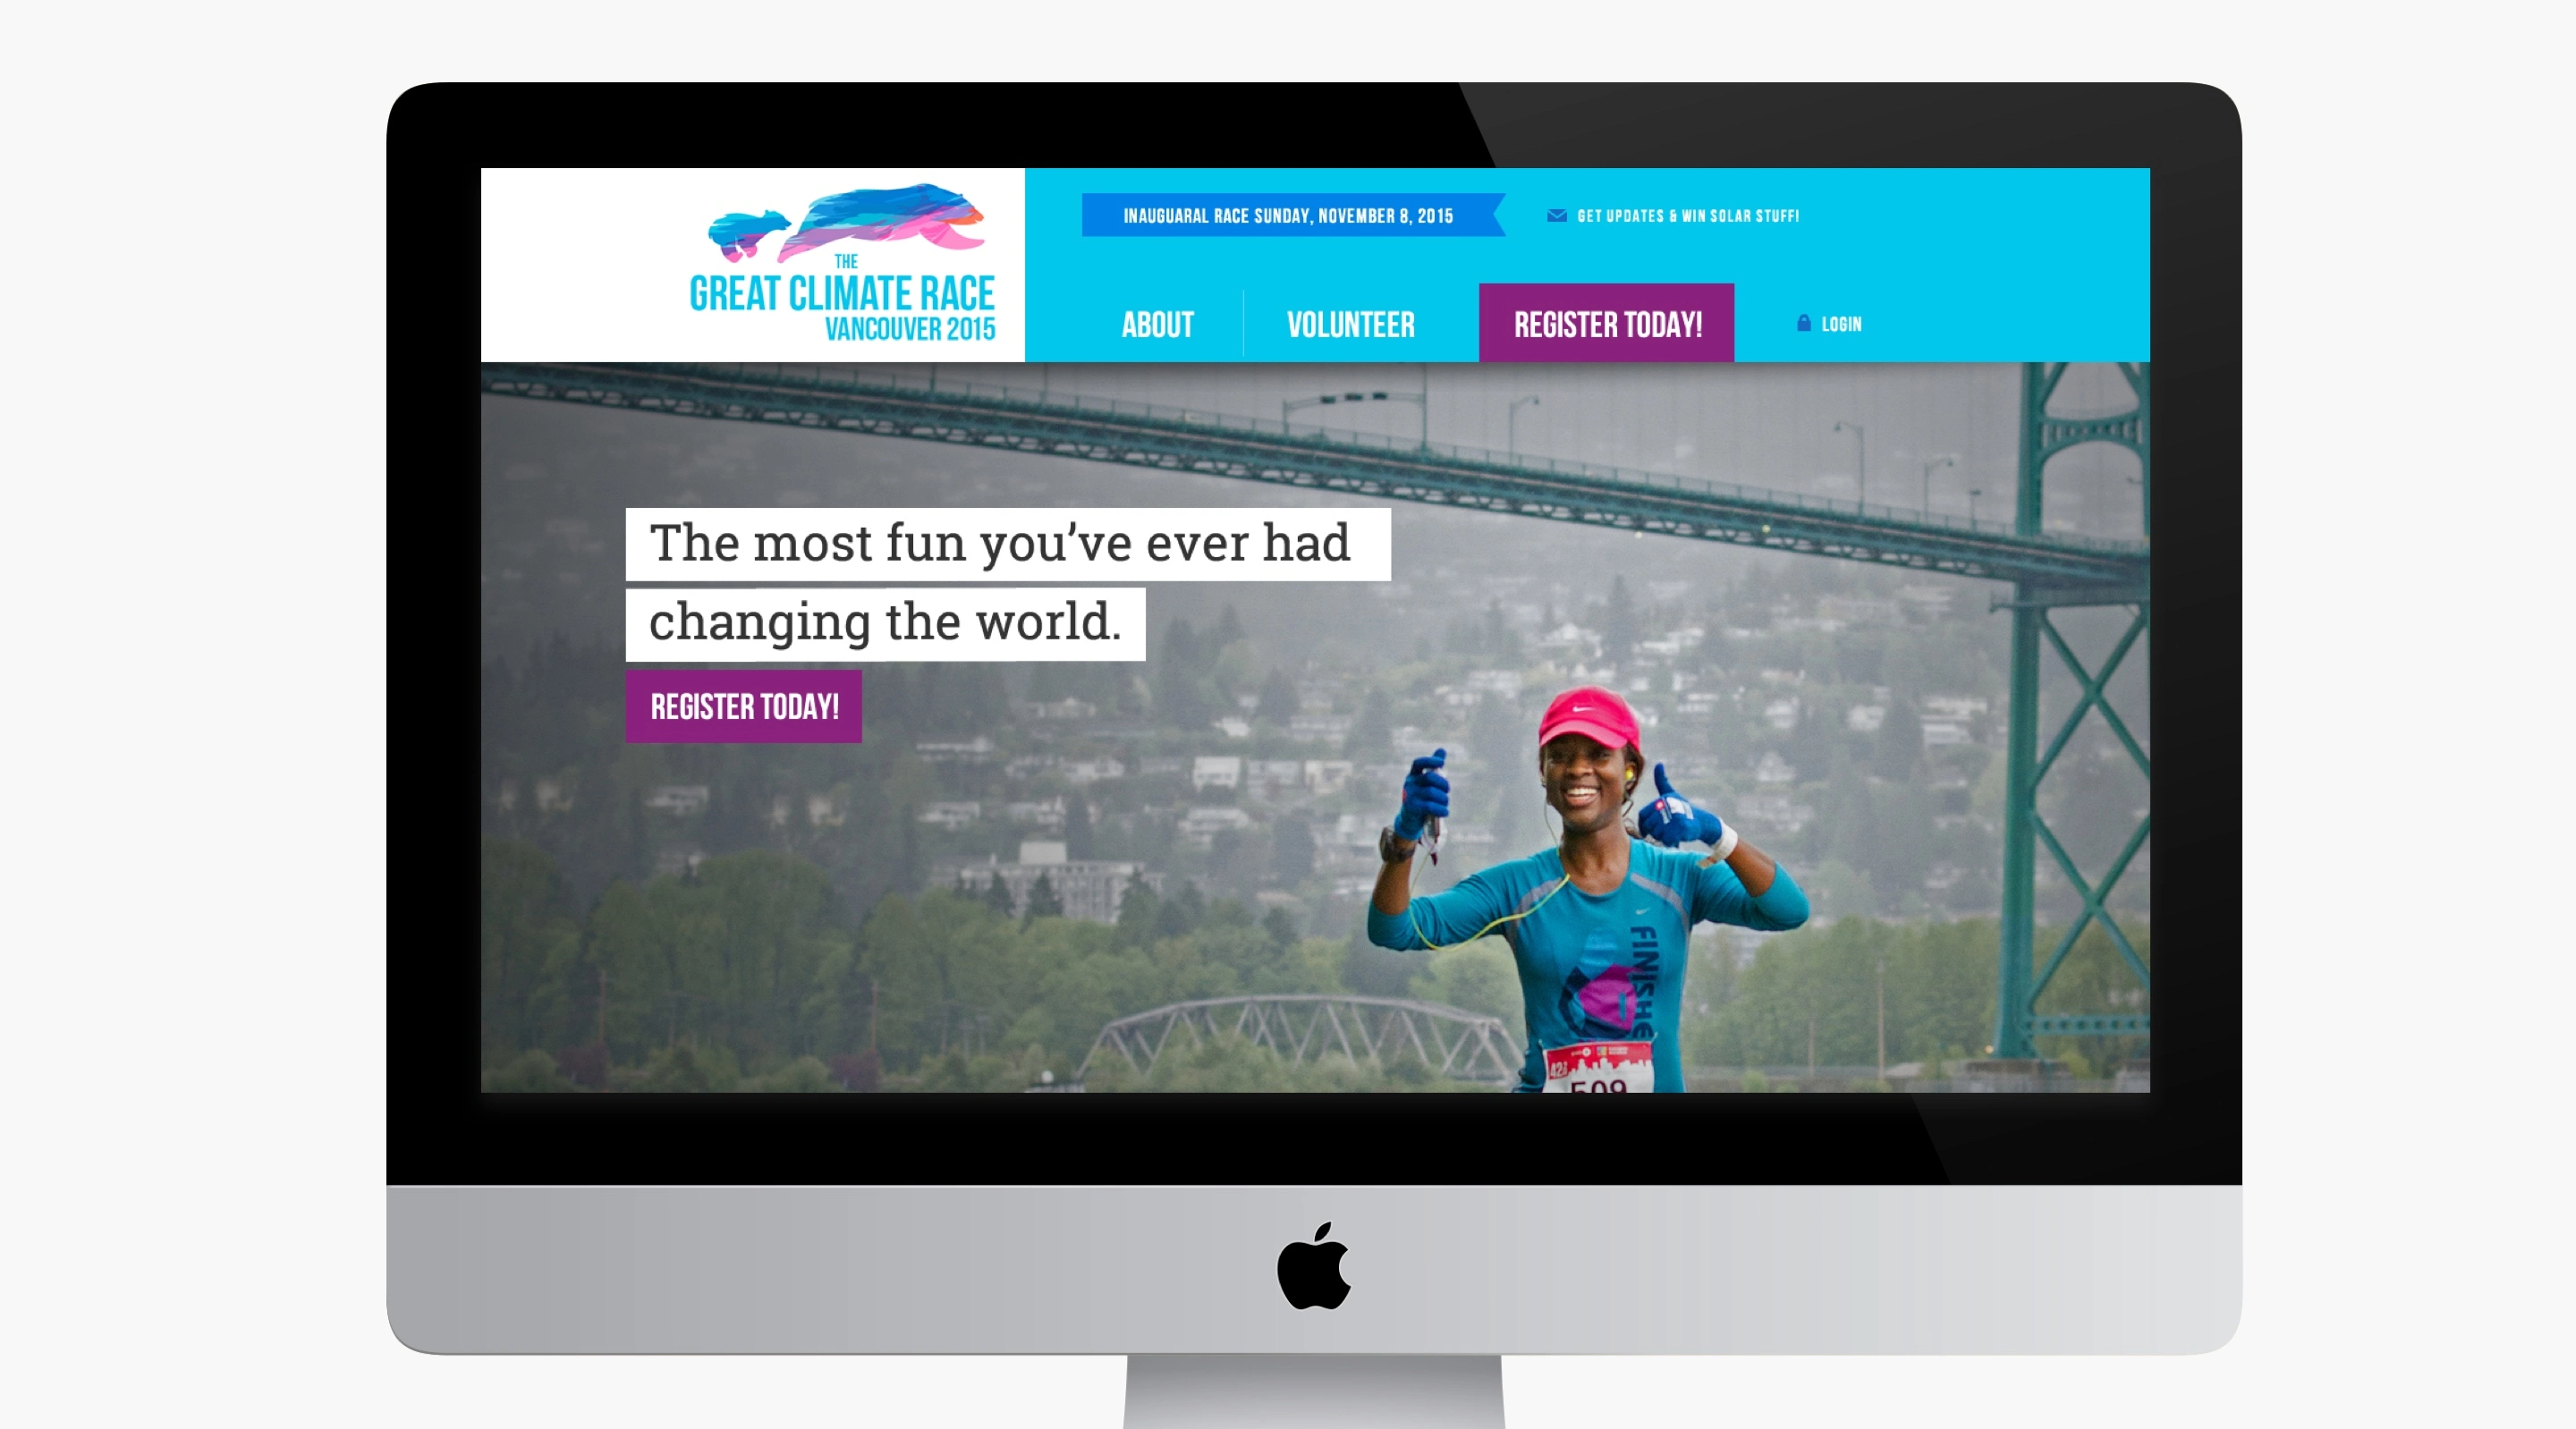 Desktop screen displaying the great climate race website